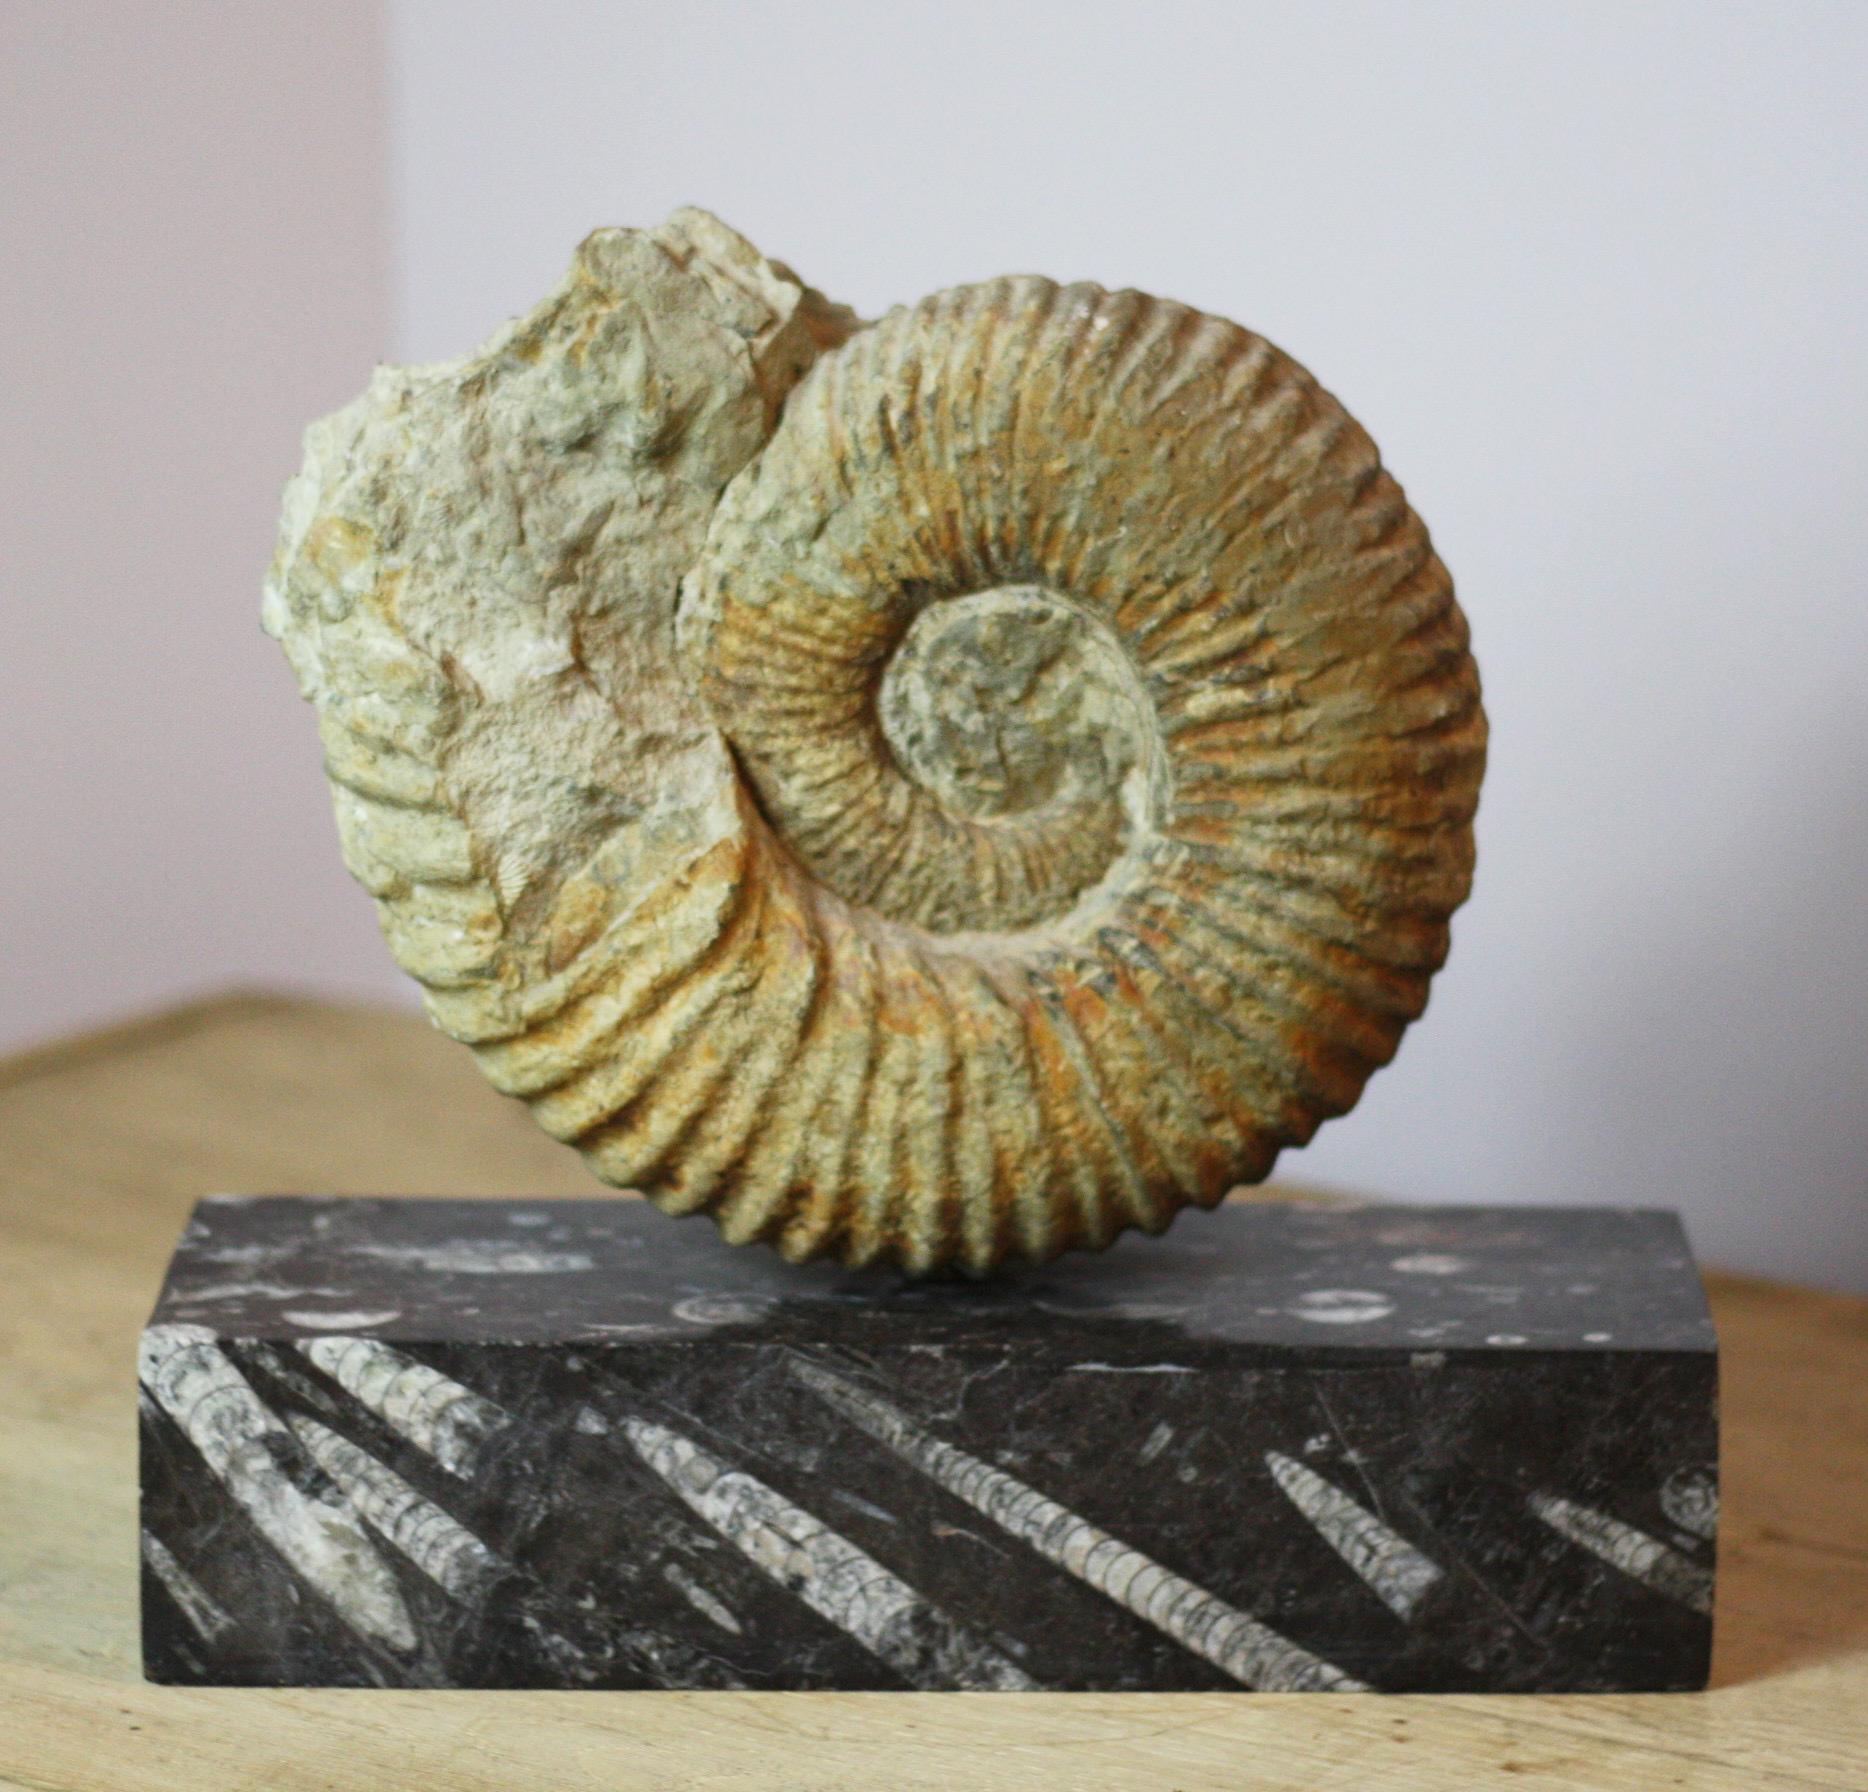 Wonderful large ammonite fossil from Morocco on stunning fossil base - rare and interesting in excellent preservation